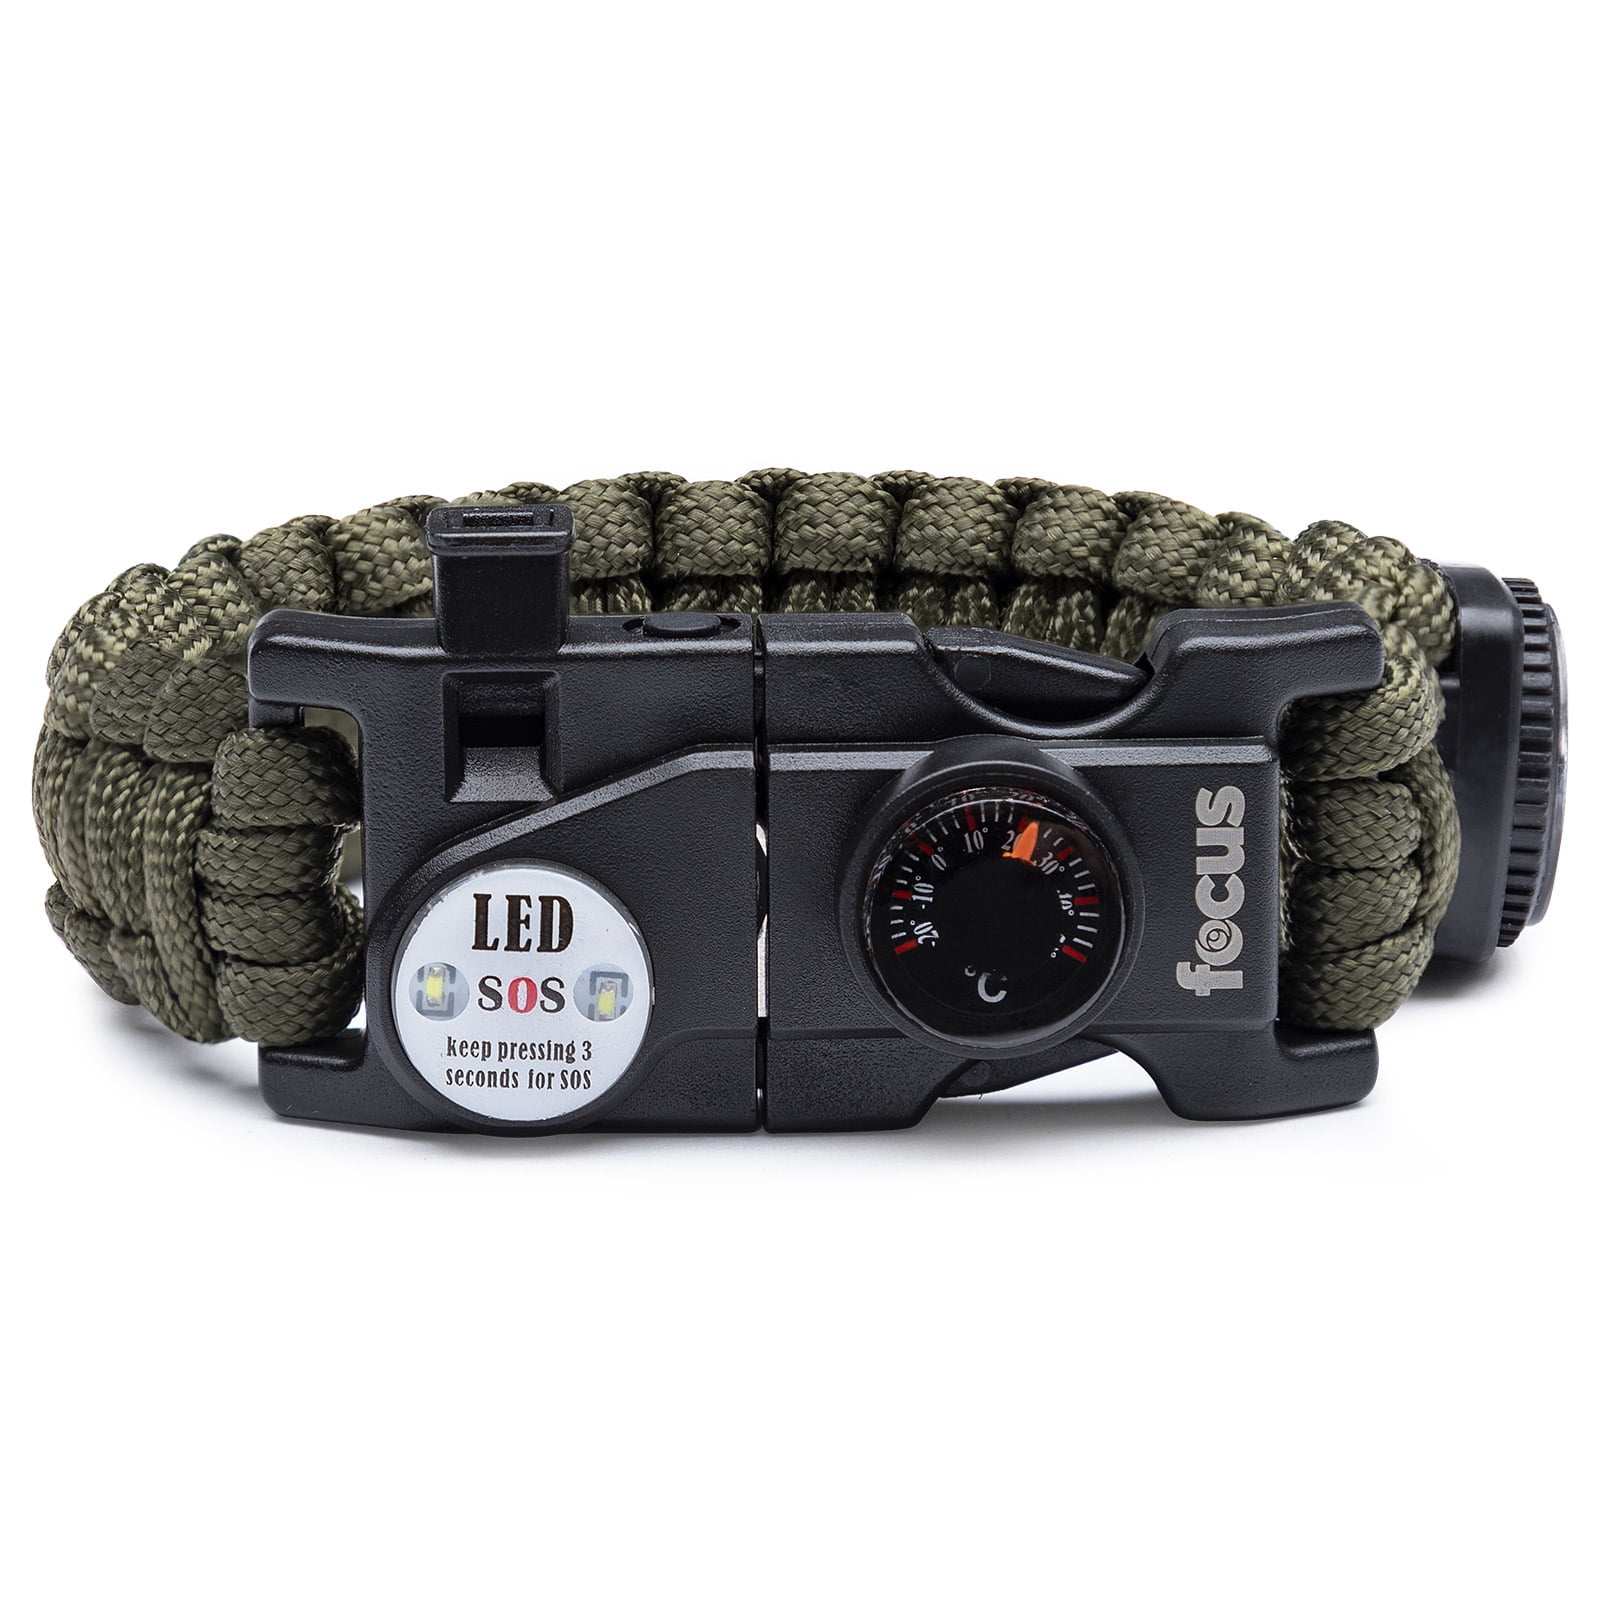 Multifunctional Paracord Bracelet – With Fire Flint Starter Scraper,  Compass, Whistle, for Hiking Camping Emergency, 5 in 1 survival kit Climbing